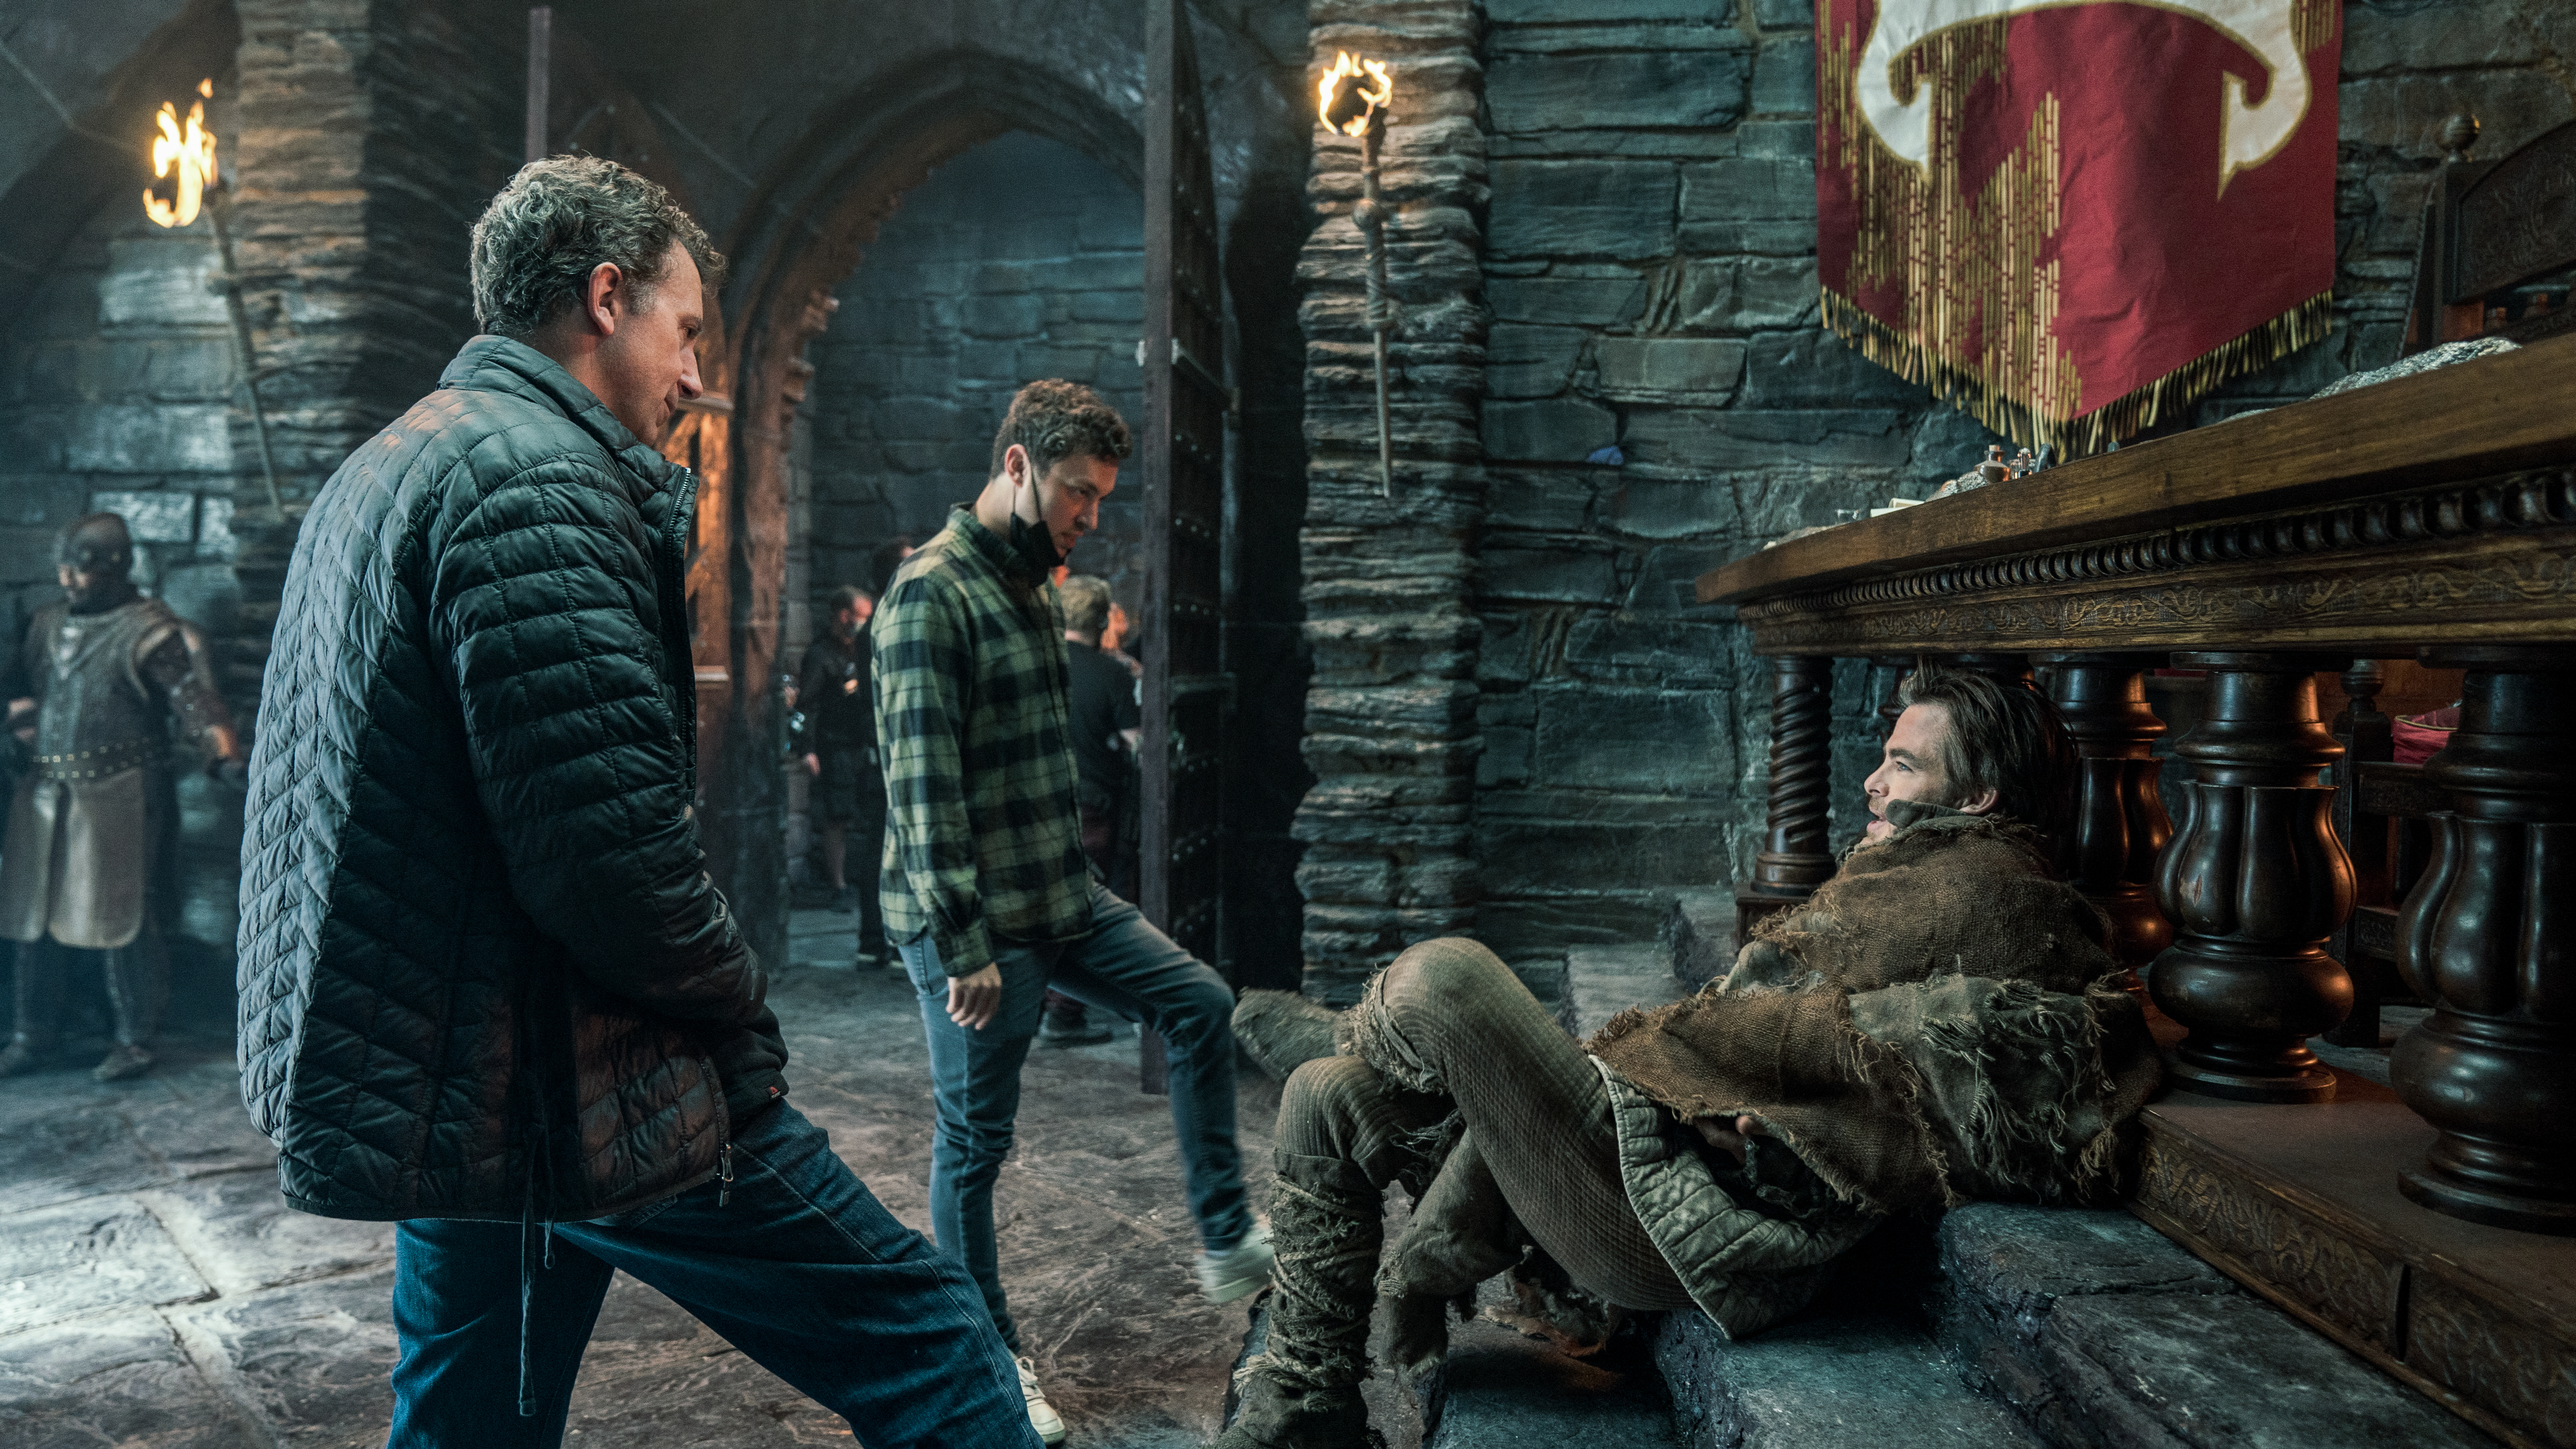 Directors Jonathan Goldstein and John Francis Daley and Chris Pine on the set of 'Dungeons & Dragons: Honor Among Thieves'. Image: Paramount Pictures / eOne / Supplied